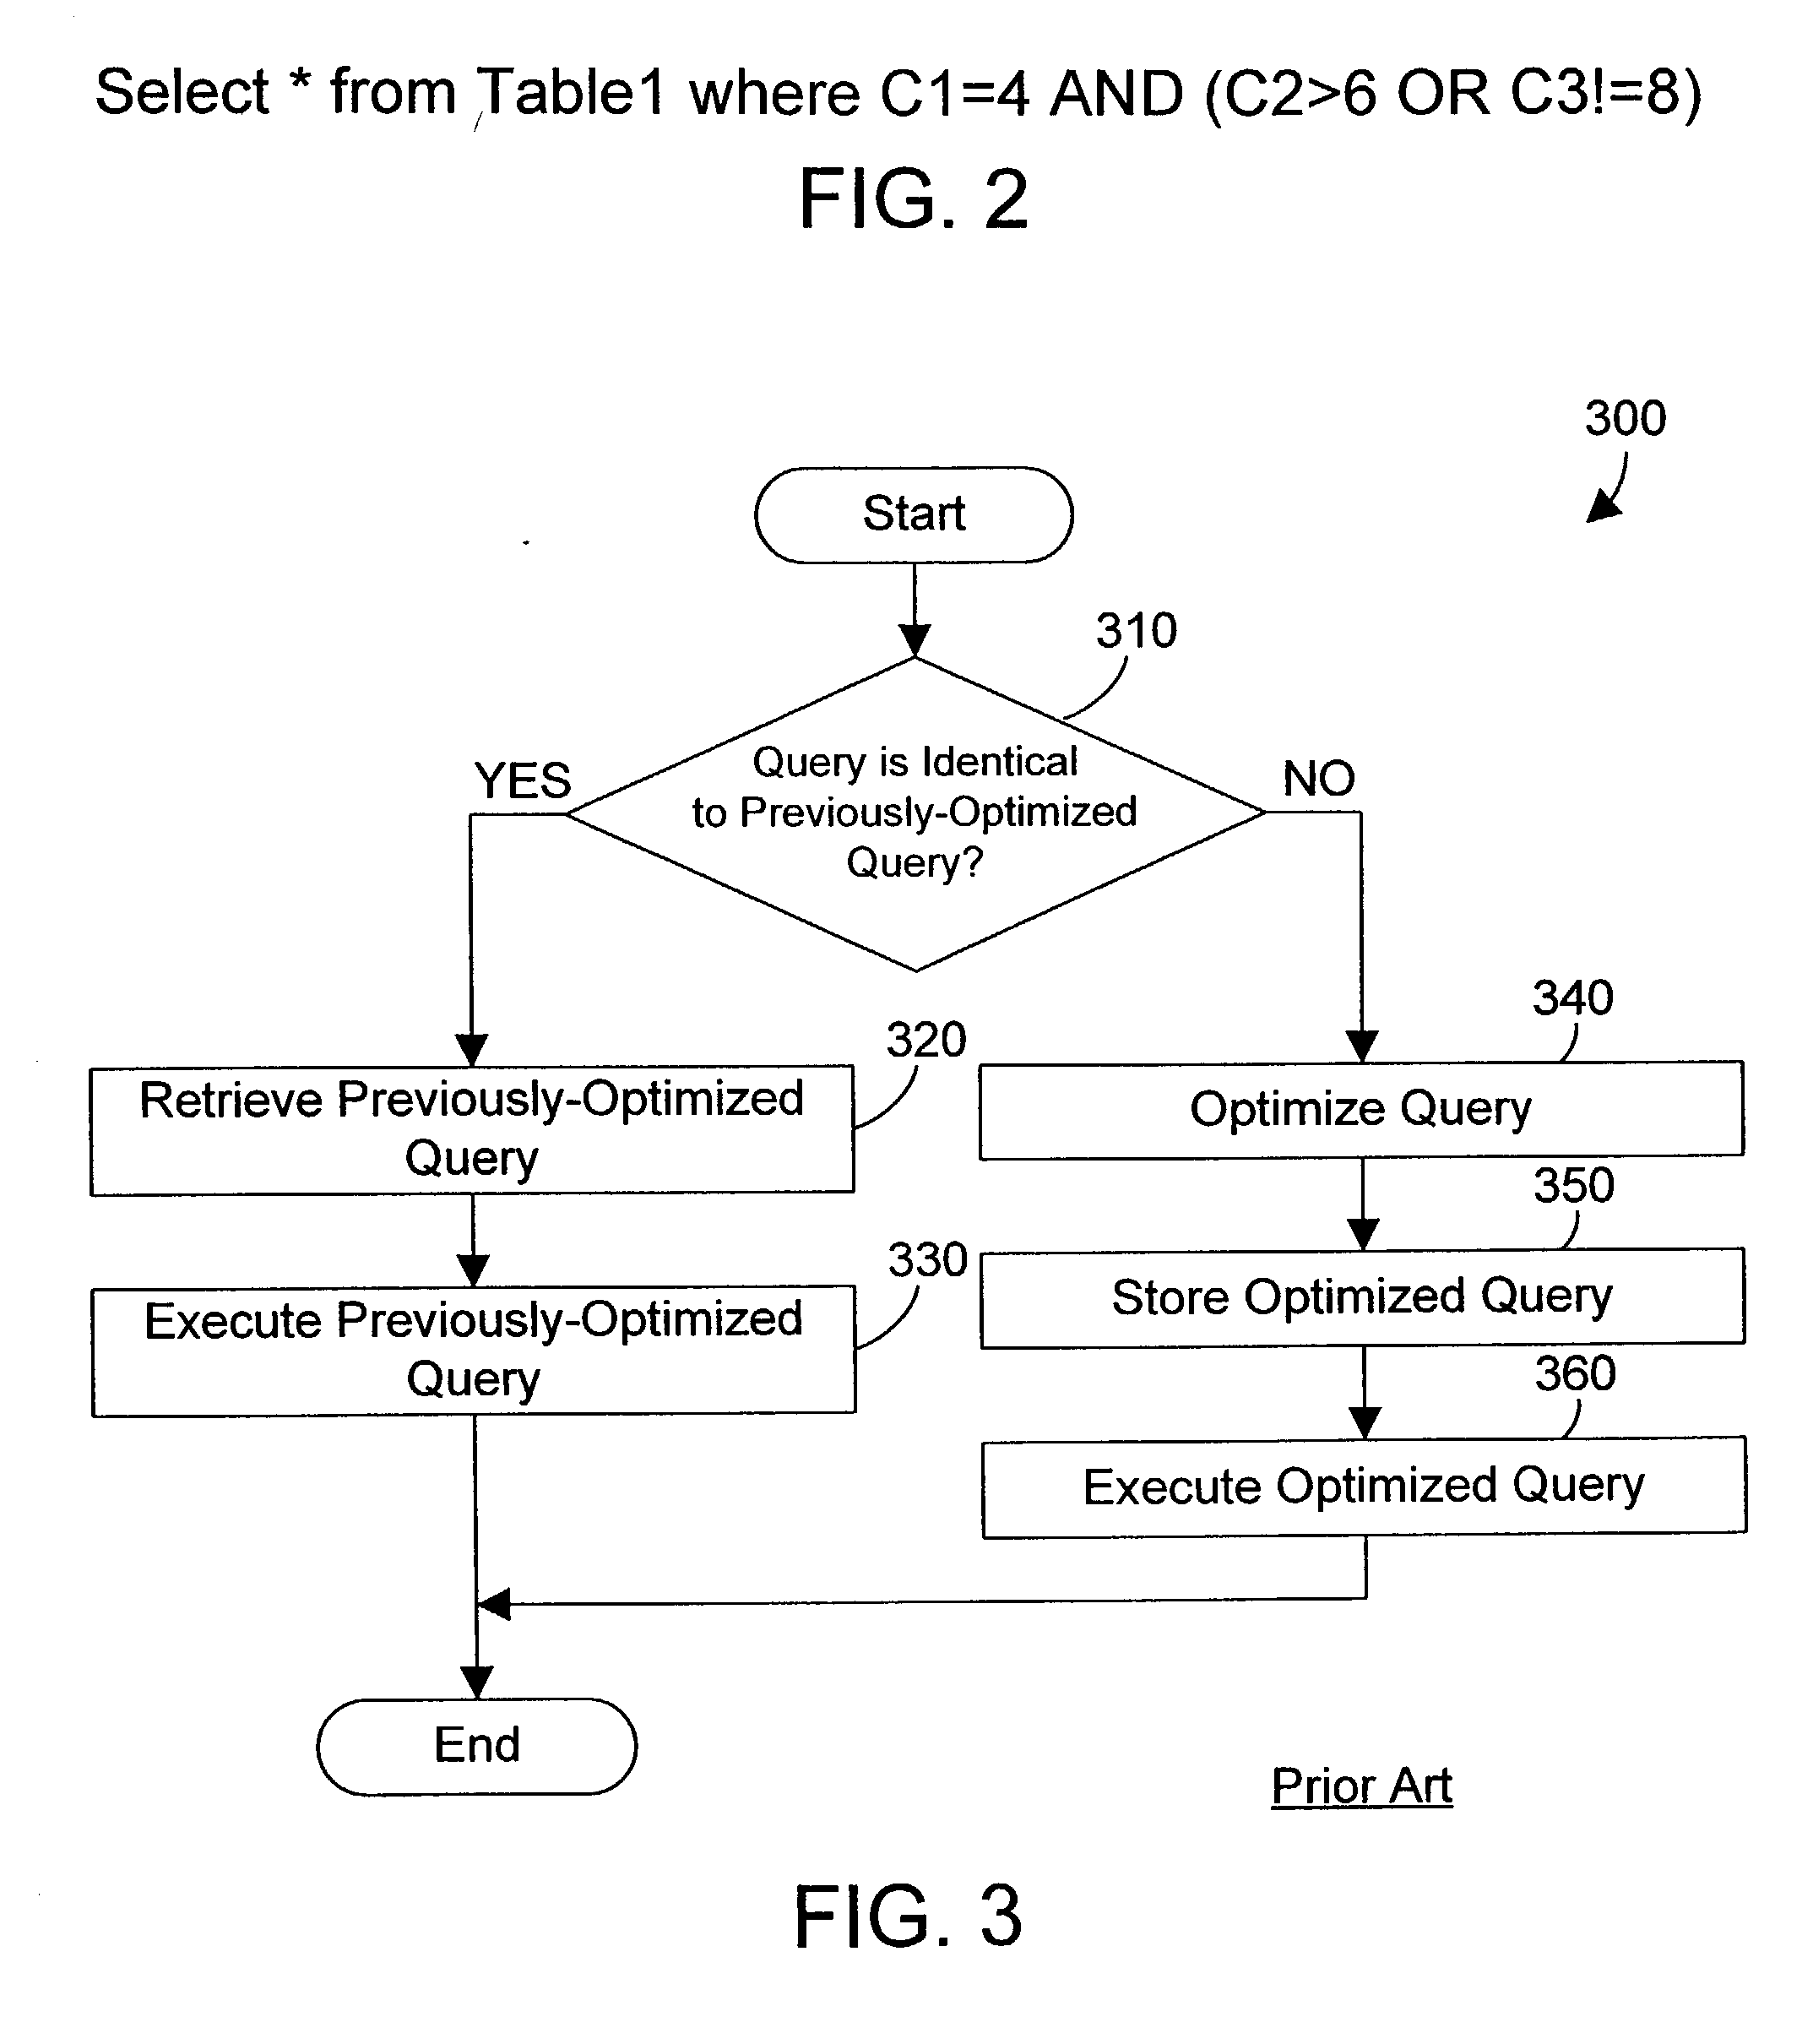 Apparatus and method for refreshing a database query